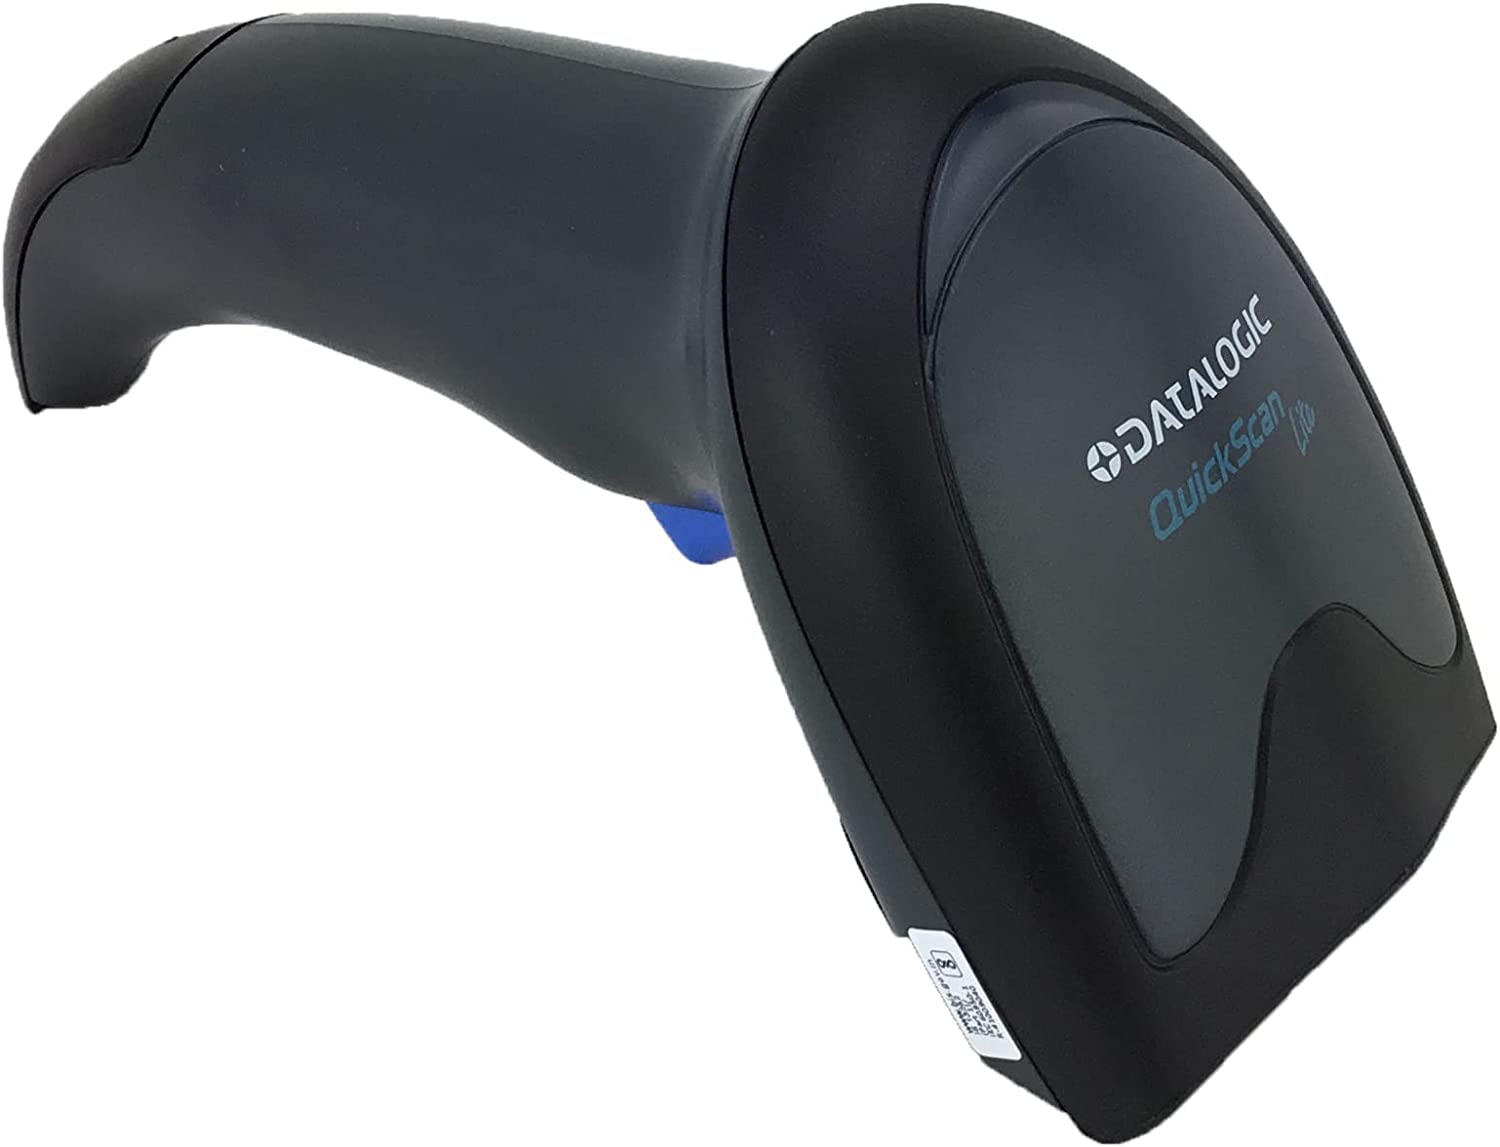 Datalogic QuickScan Lite QW2120 Handheld  Barcode Scanner/Linear Imager with USB Cable